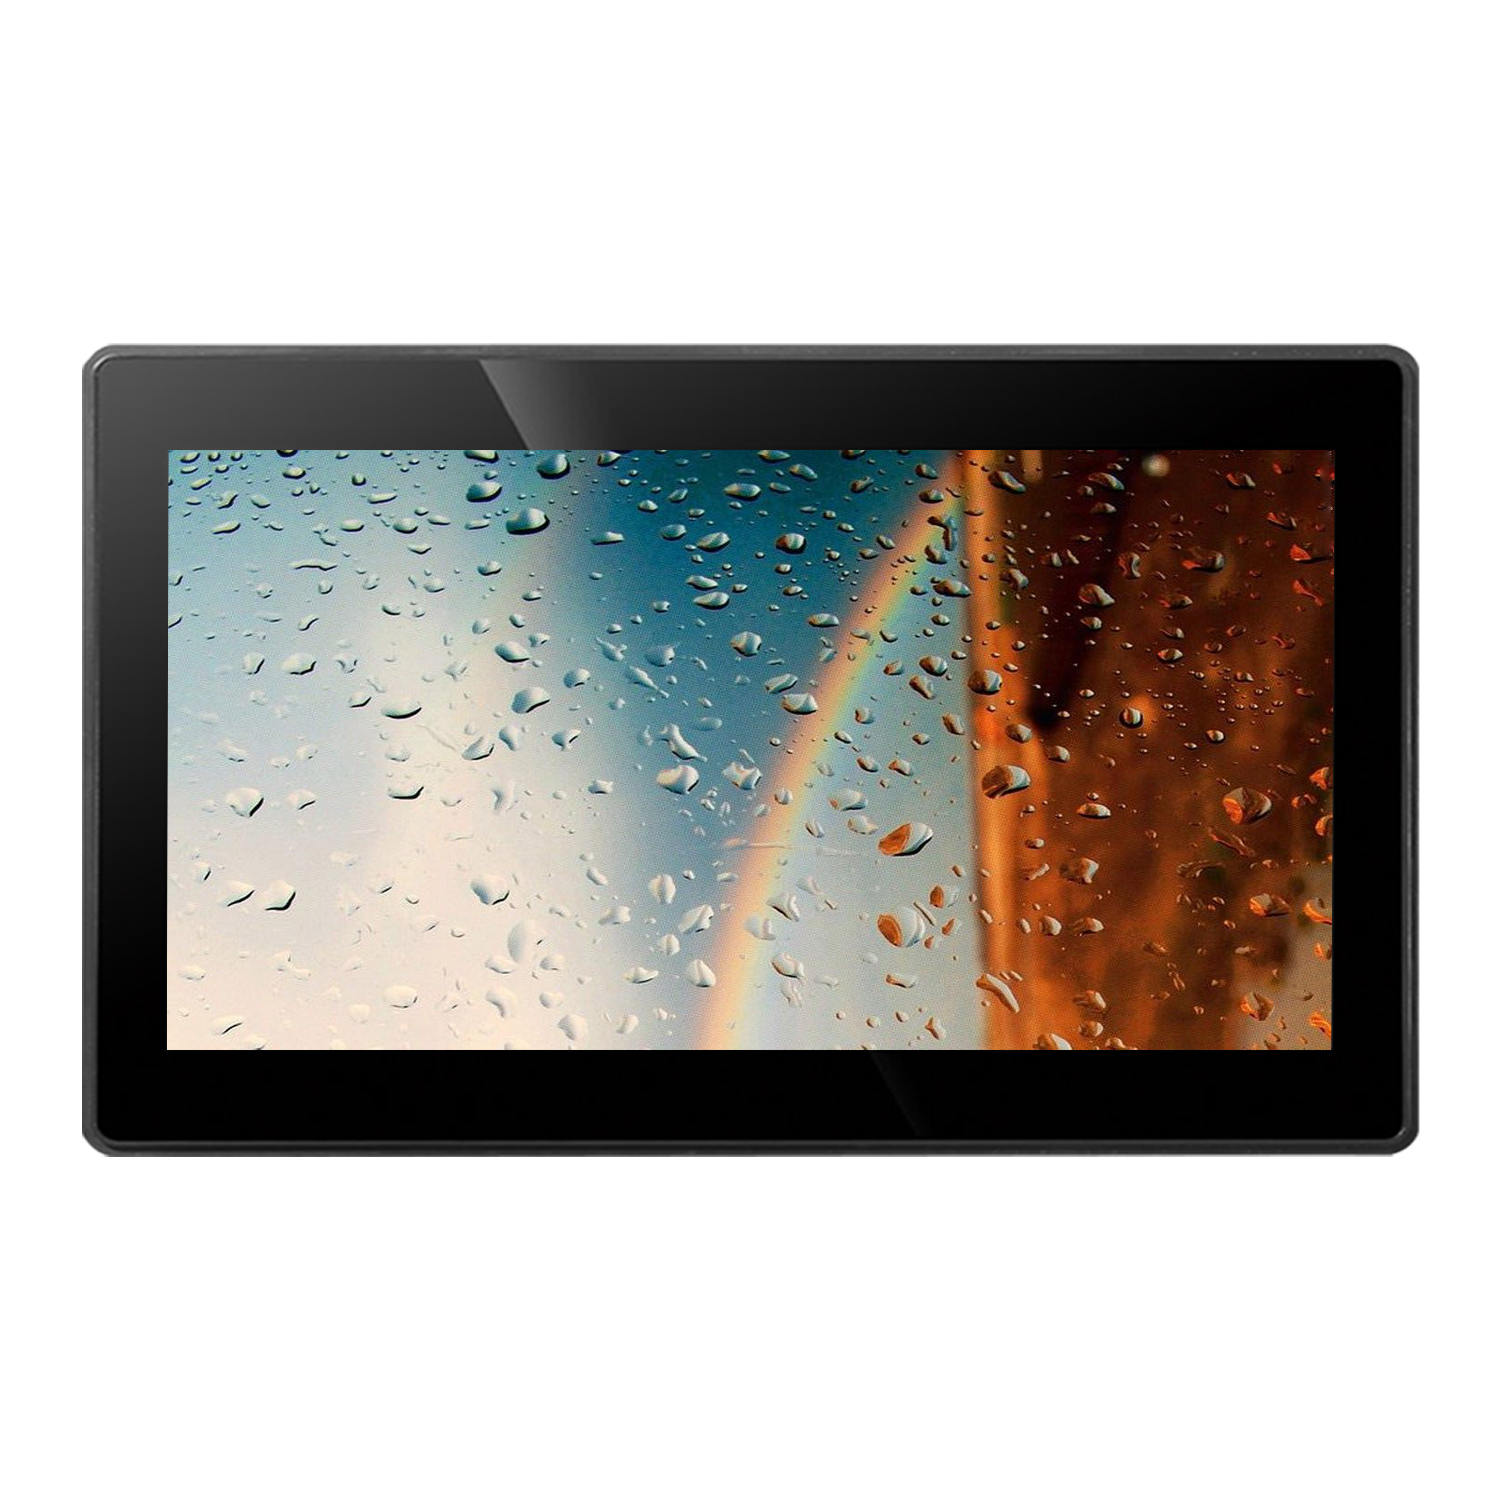 resolution high brightness widescreen touch Monitor 21.5 inch Industrial grade Monitor